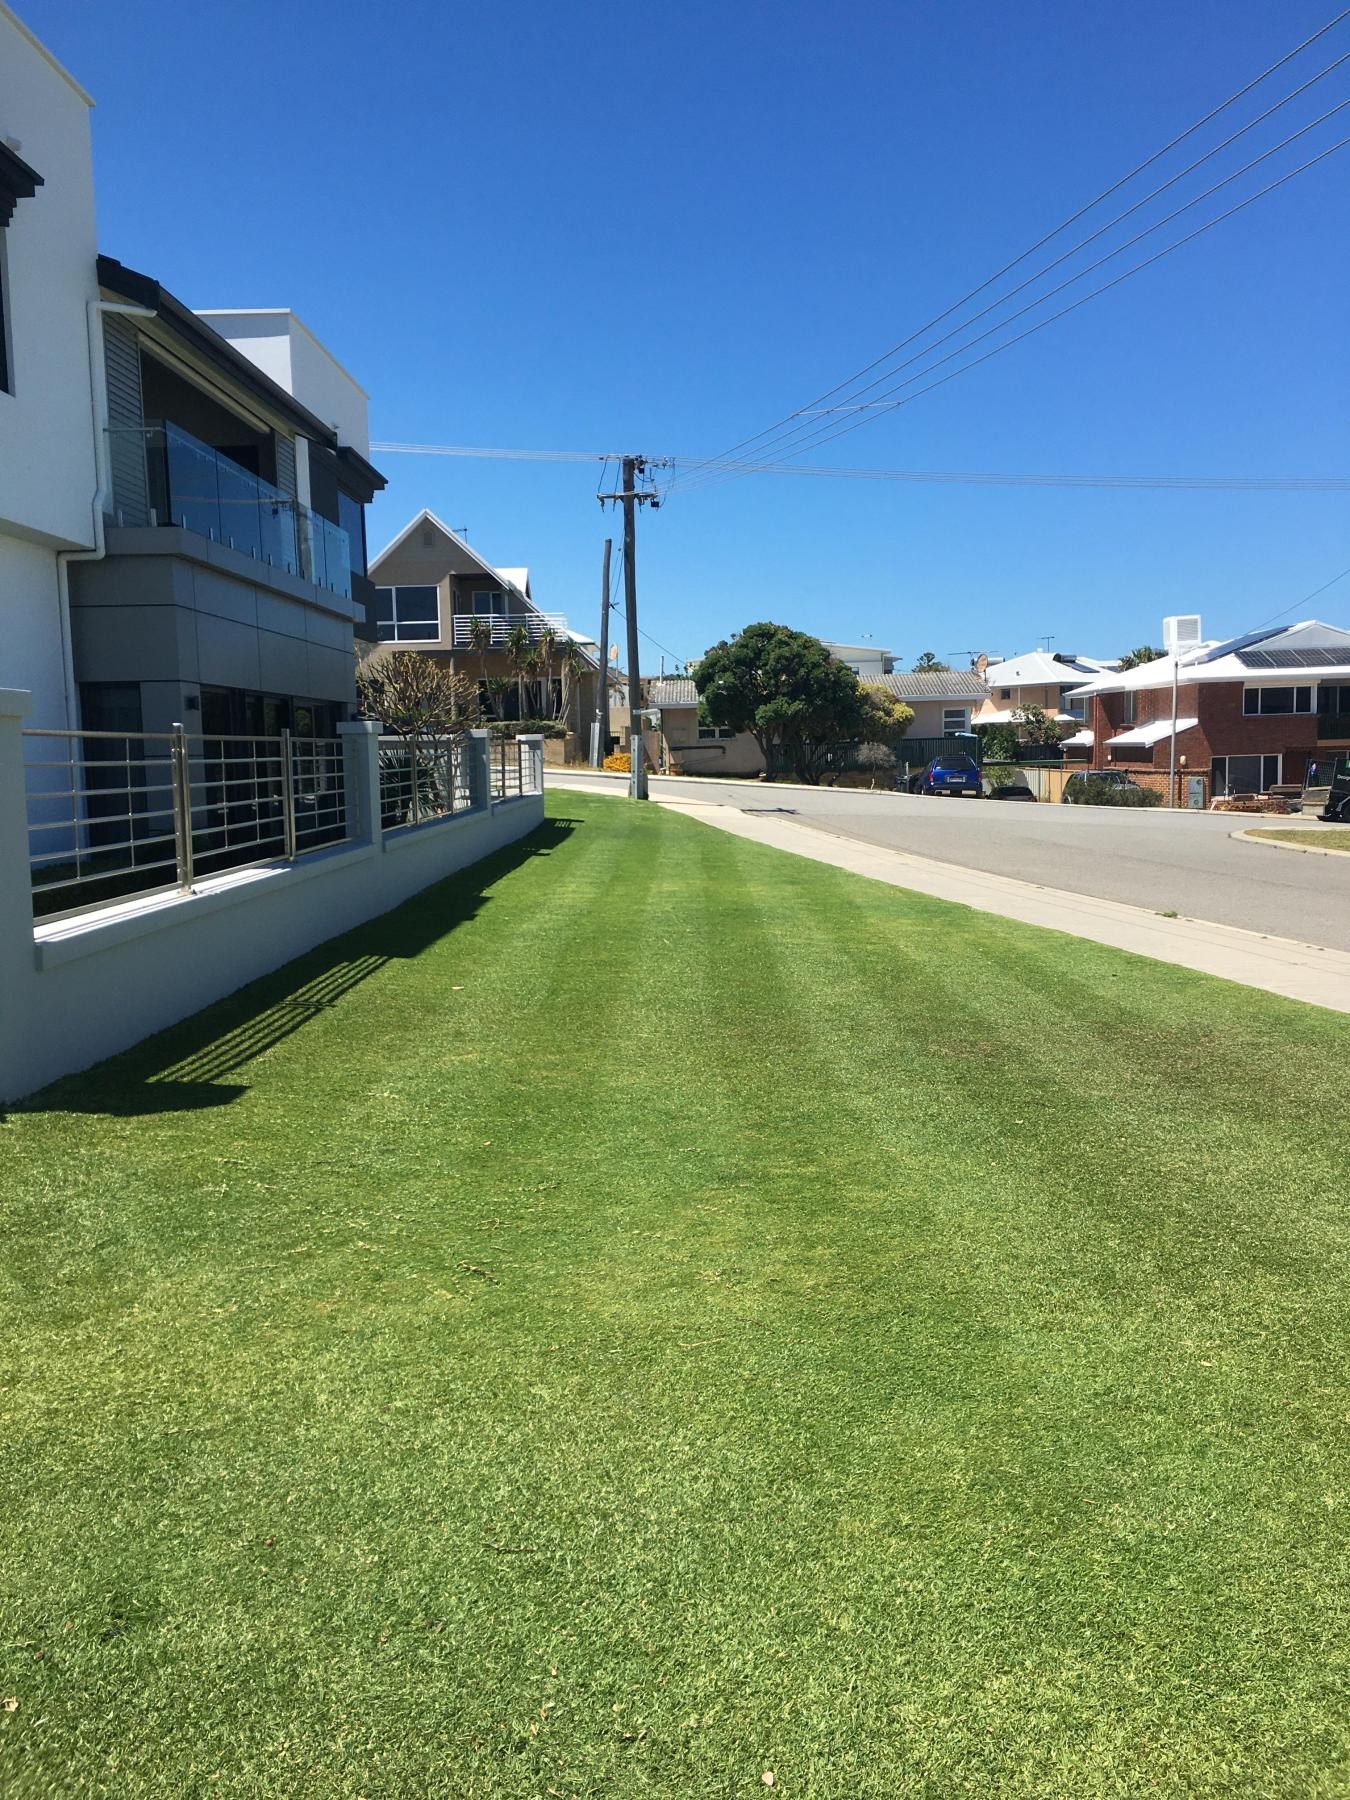 Lawn Mowing Business in Perth